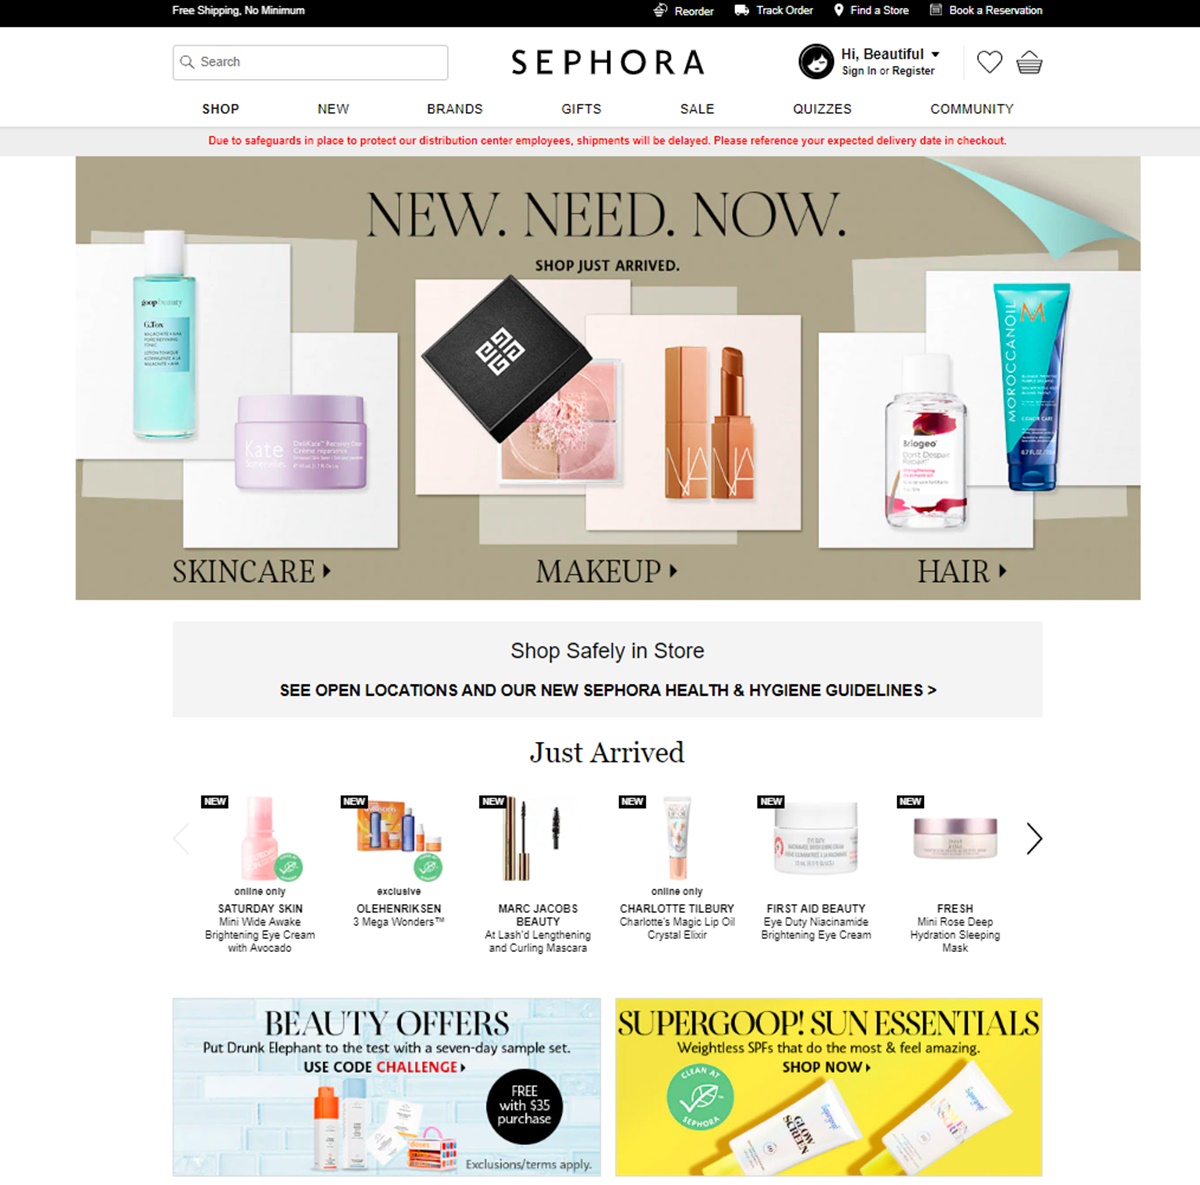 Here is an example of the homepage of Sephora.